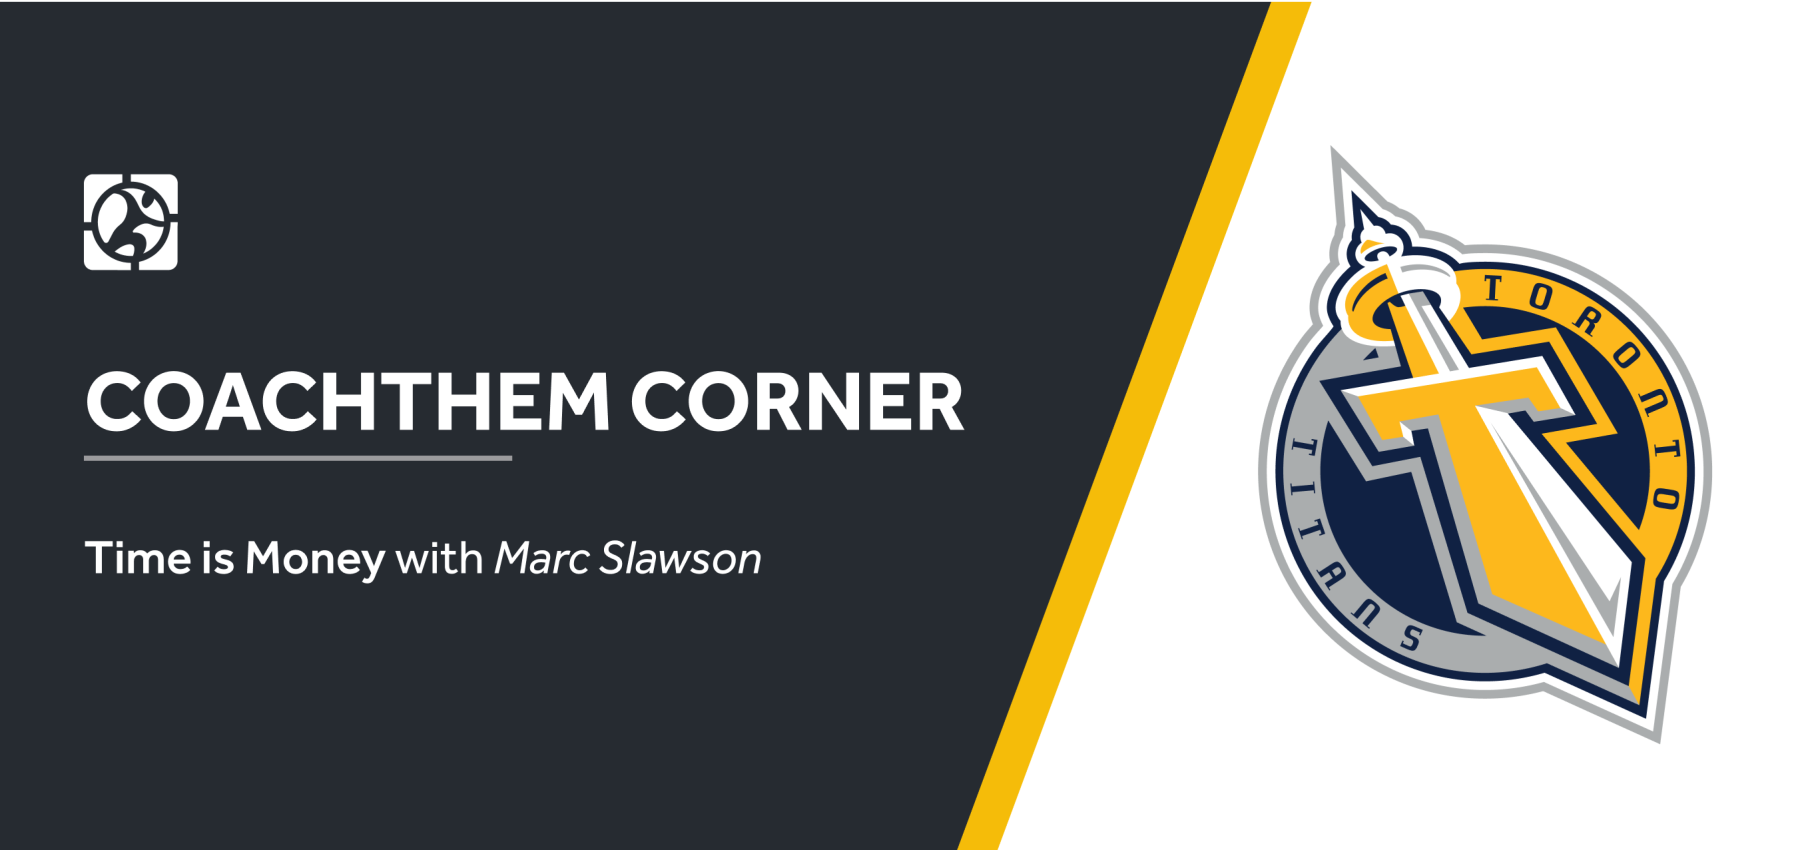 Time is Money with Marc Slawson